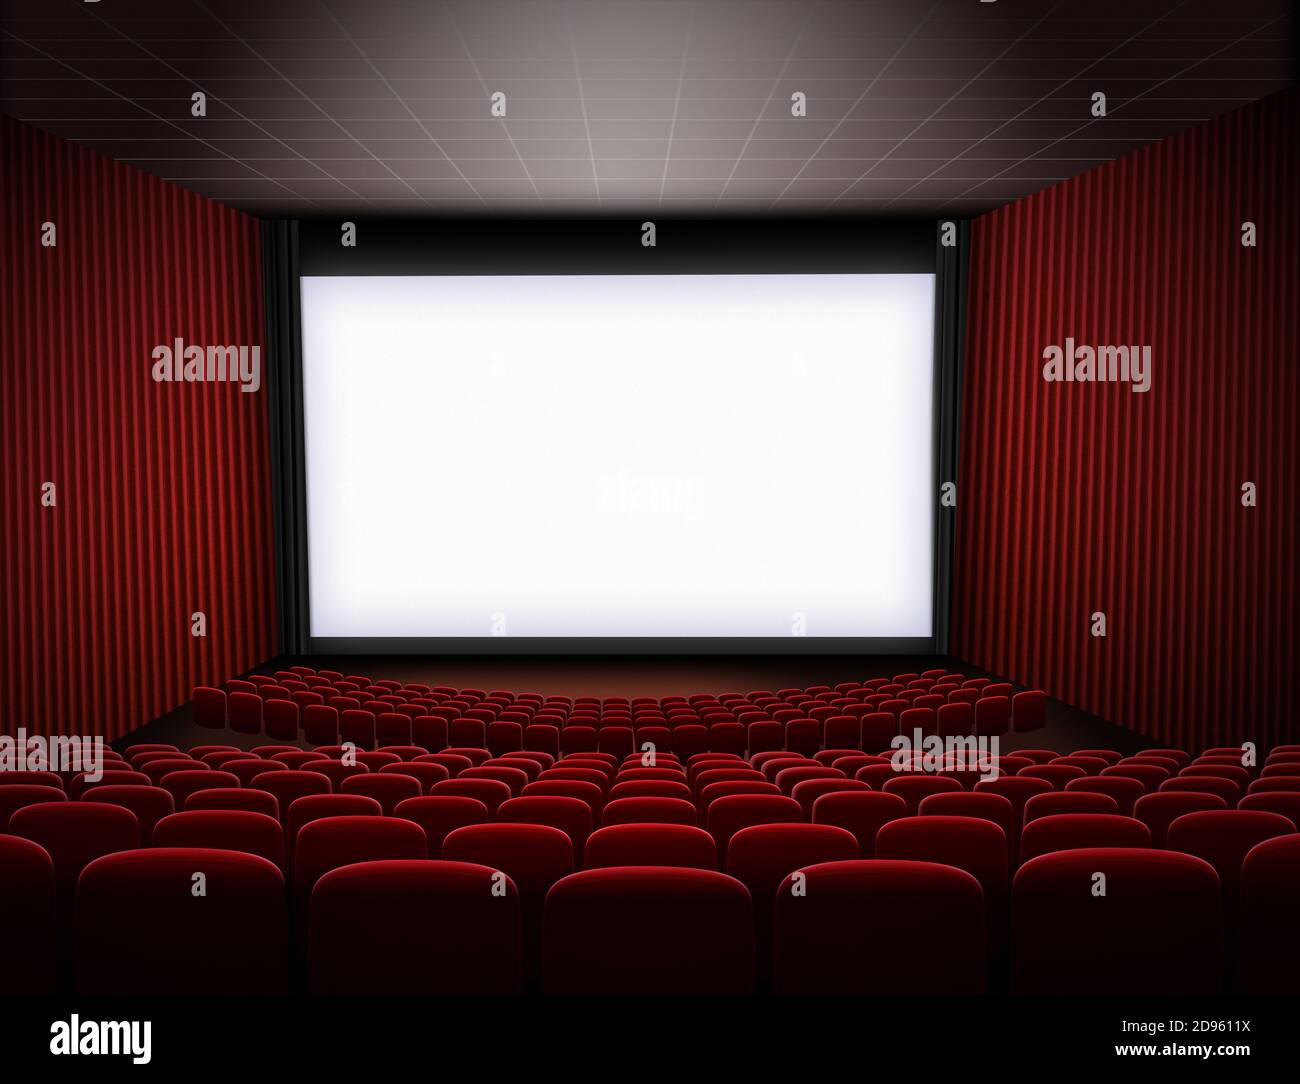 cinema theater with big screen and red seats 3d illustration Stock Photo